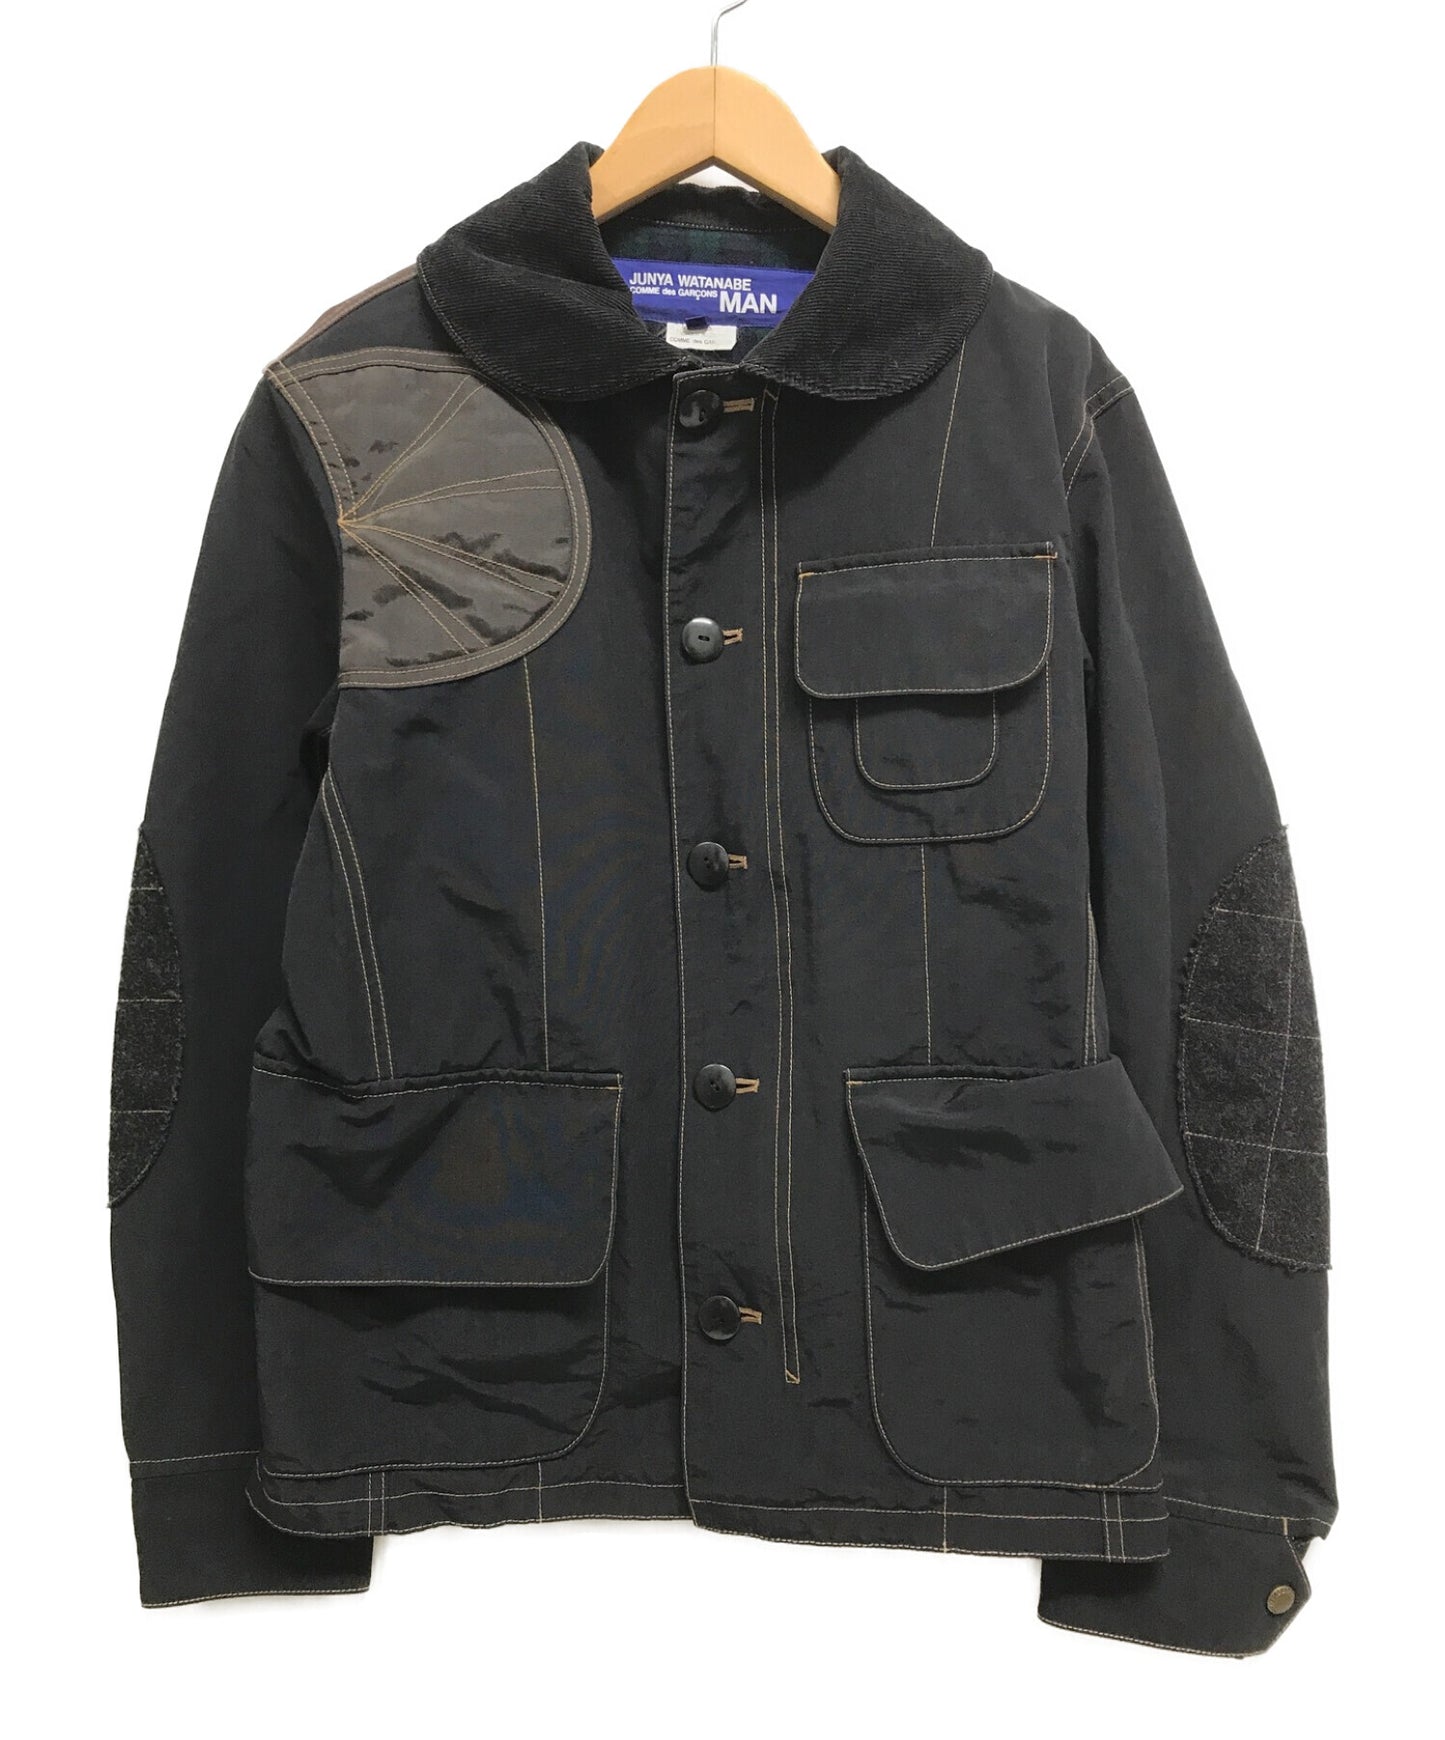 COMME DES GARCONS JUNYA WATANABE MAN COVERALL JACKEL夹克肘补丁WD-J016